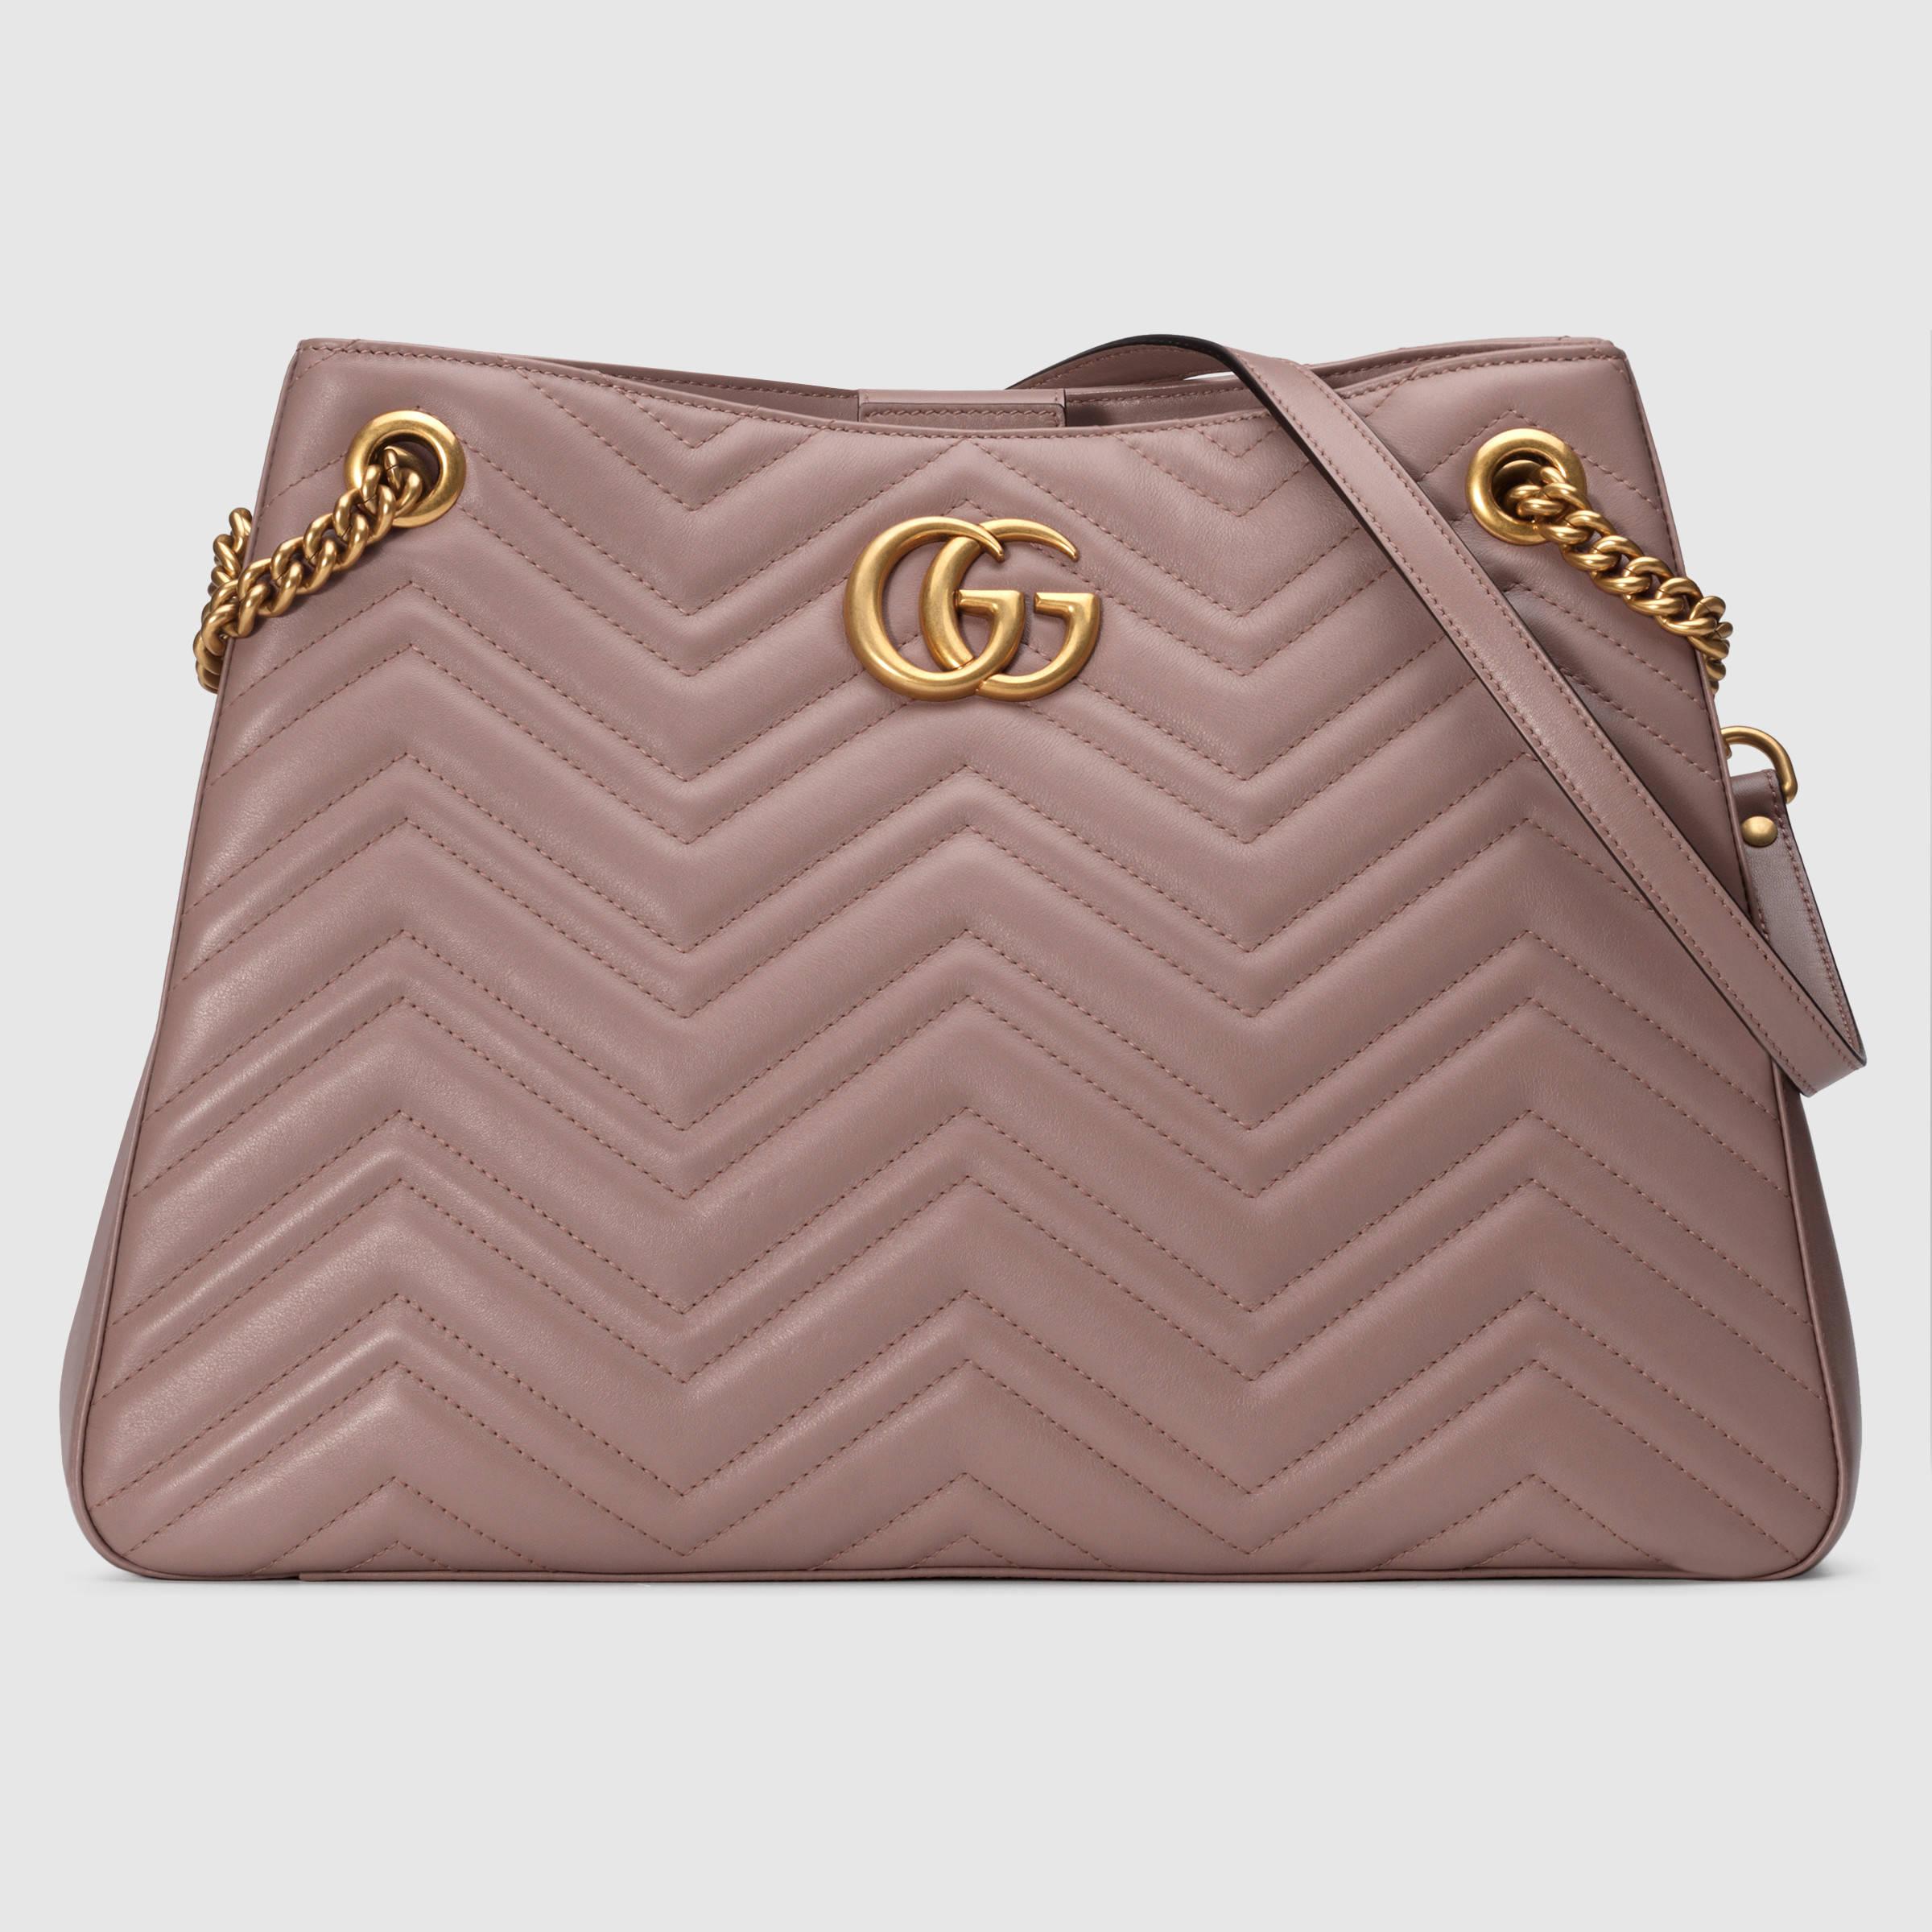 Gucci GG Marmont Matelassé Leather Shoulder Bag in Pink | Lyst